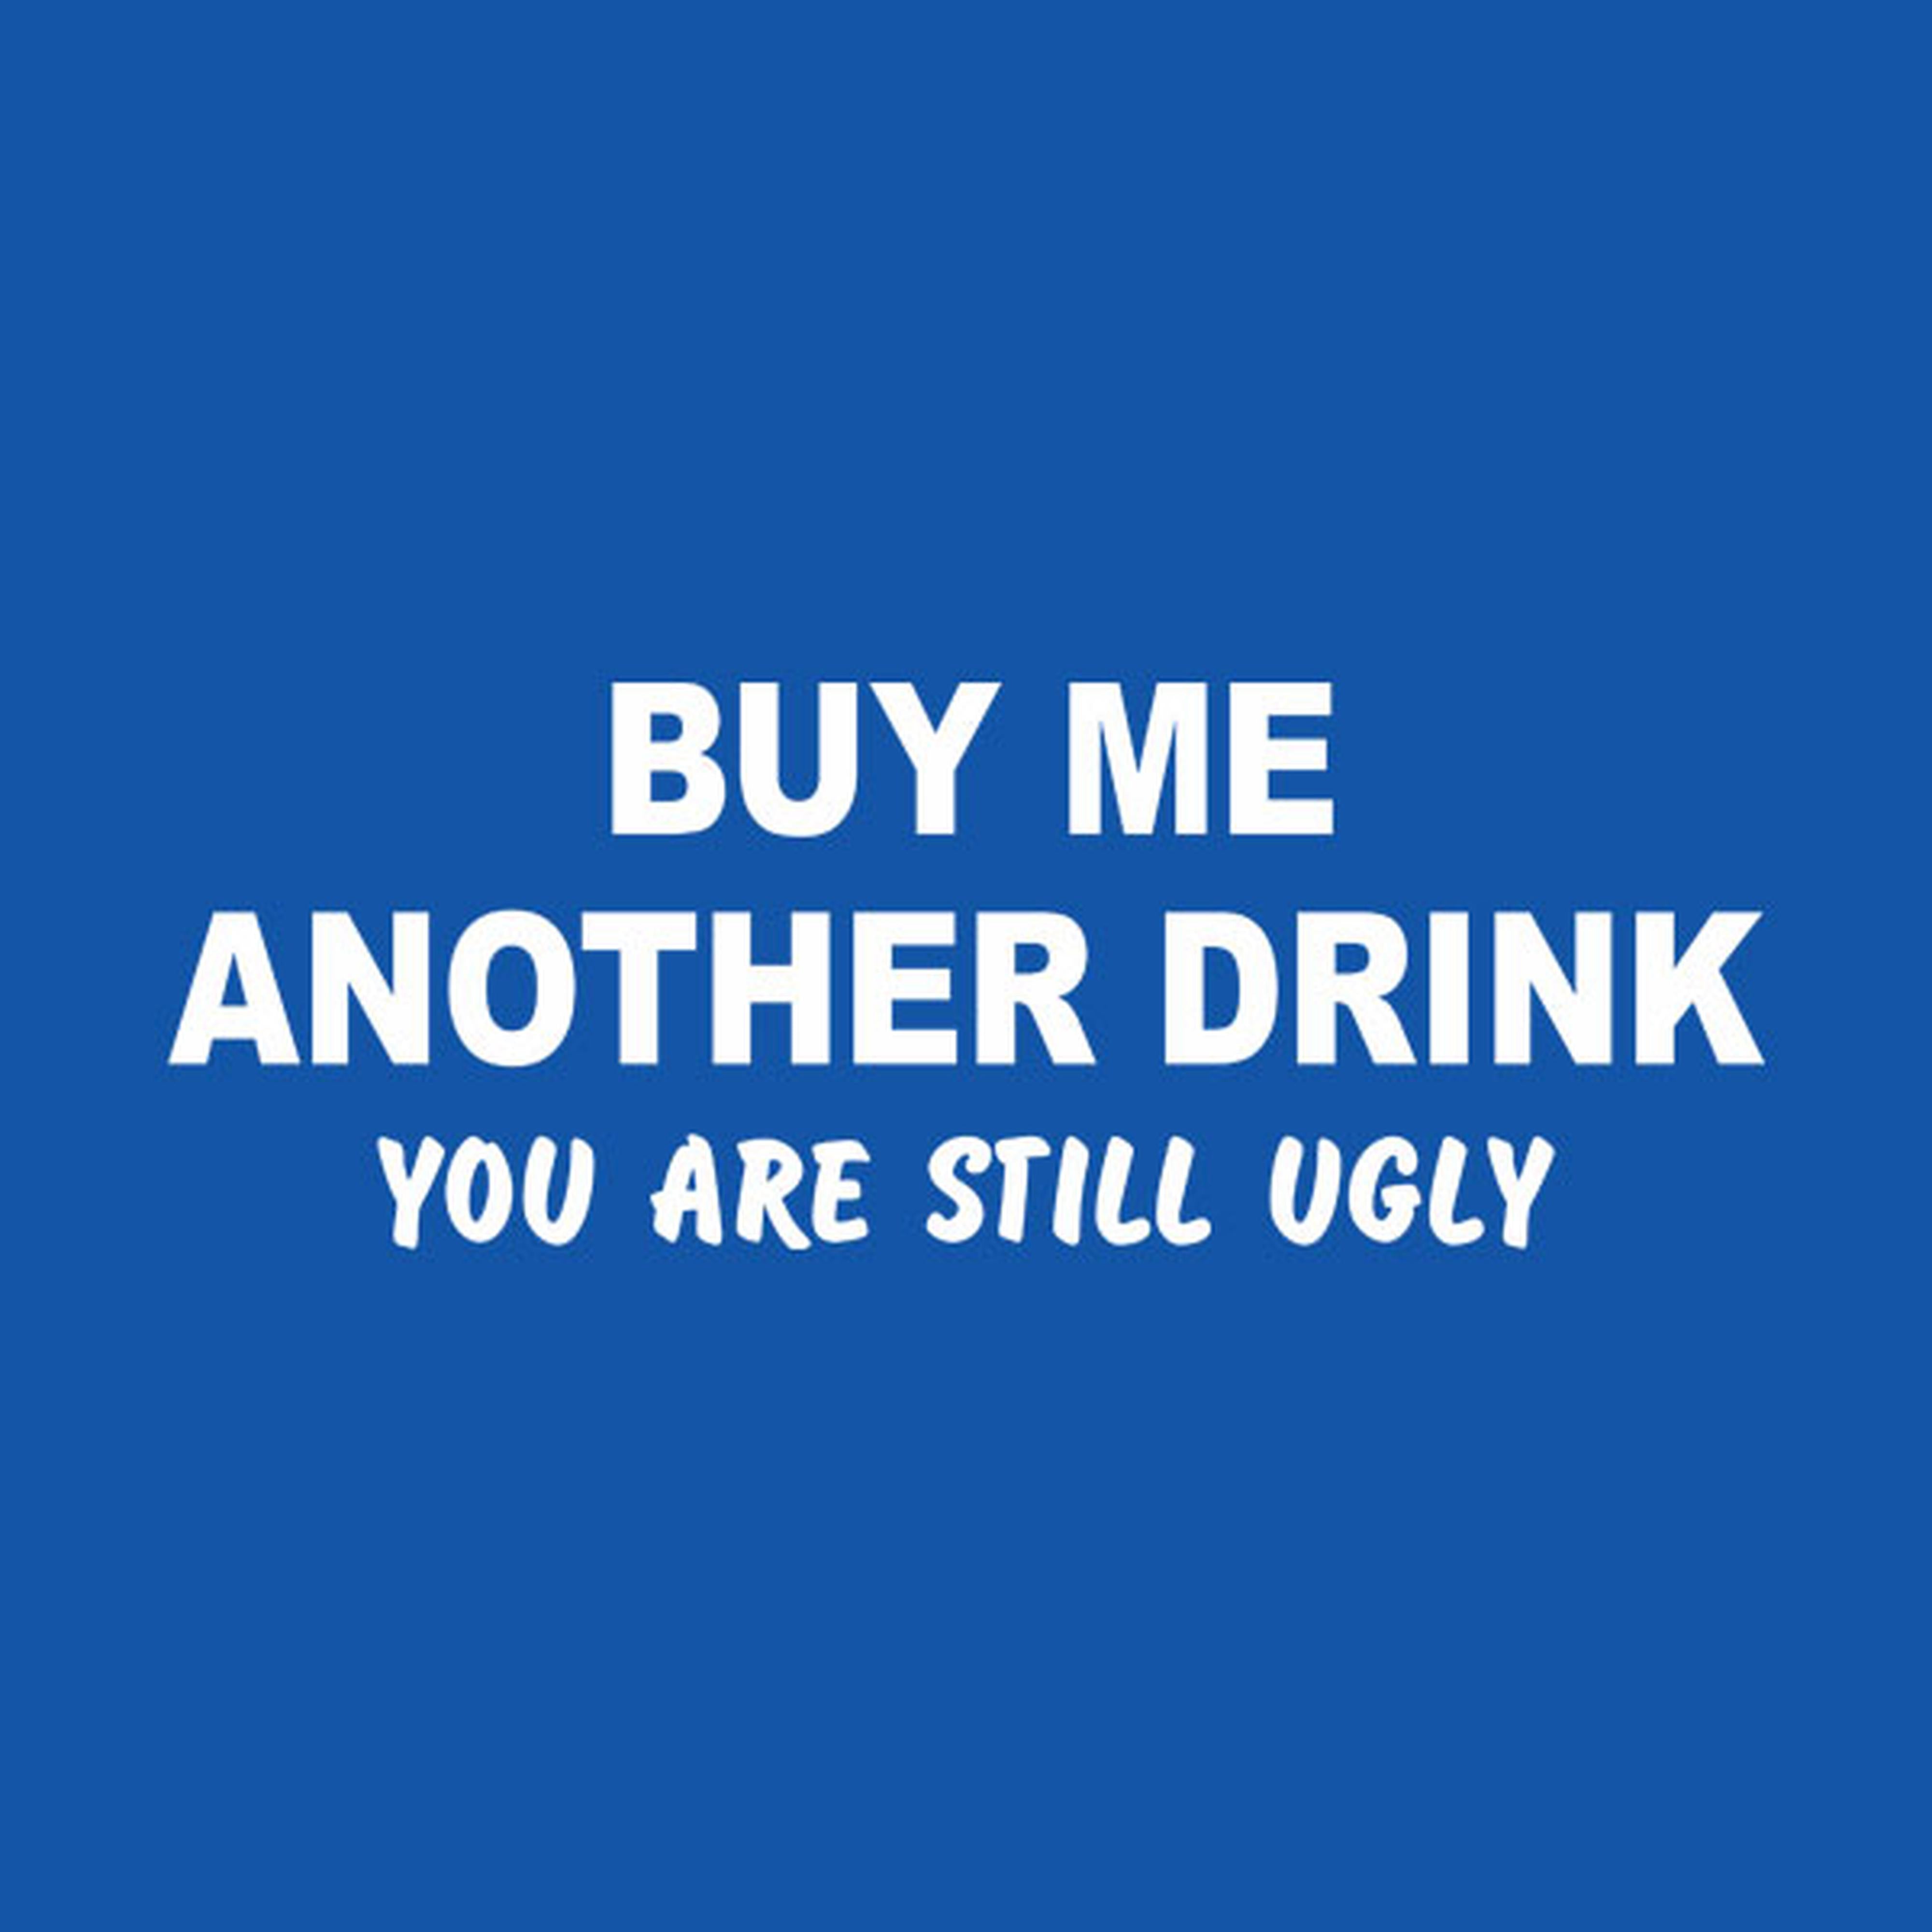 Buy me another drink. You are still ugly - T-shirt